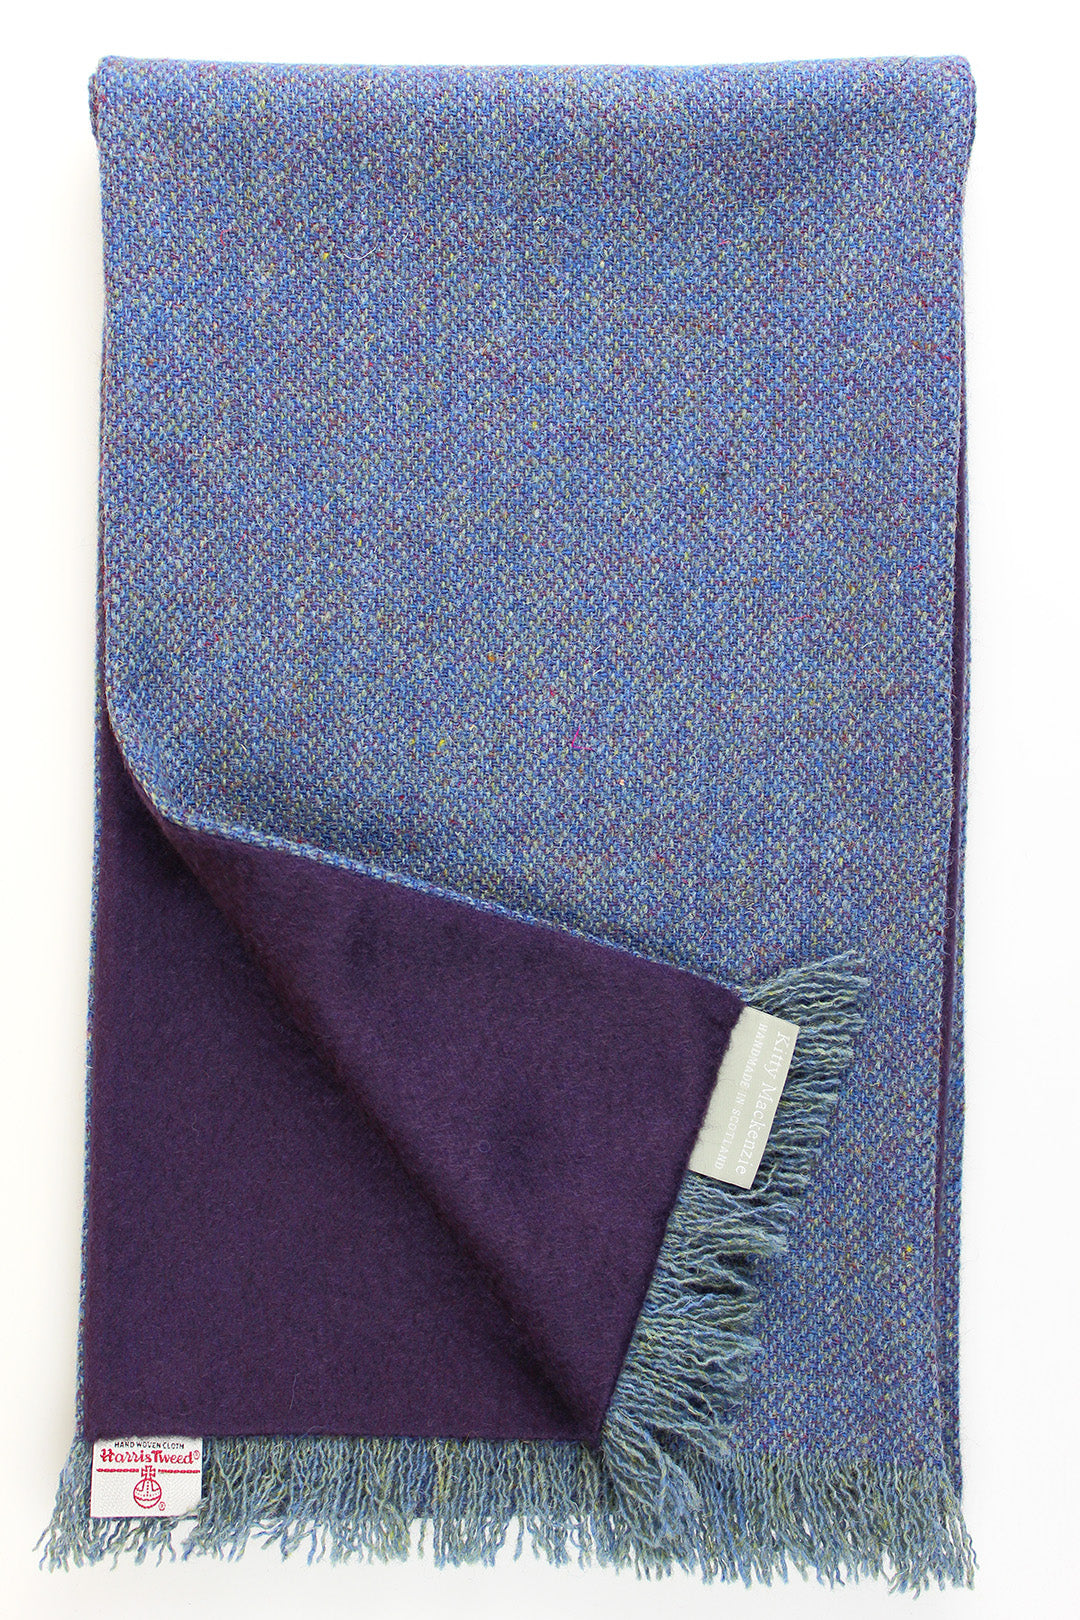 Harris tweed scarf in blue hues with purple cashmere lining